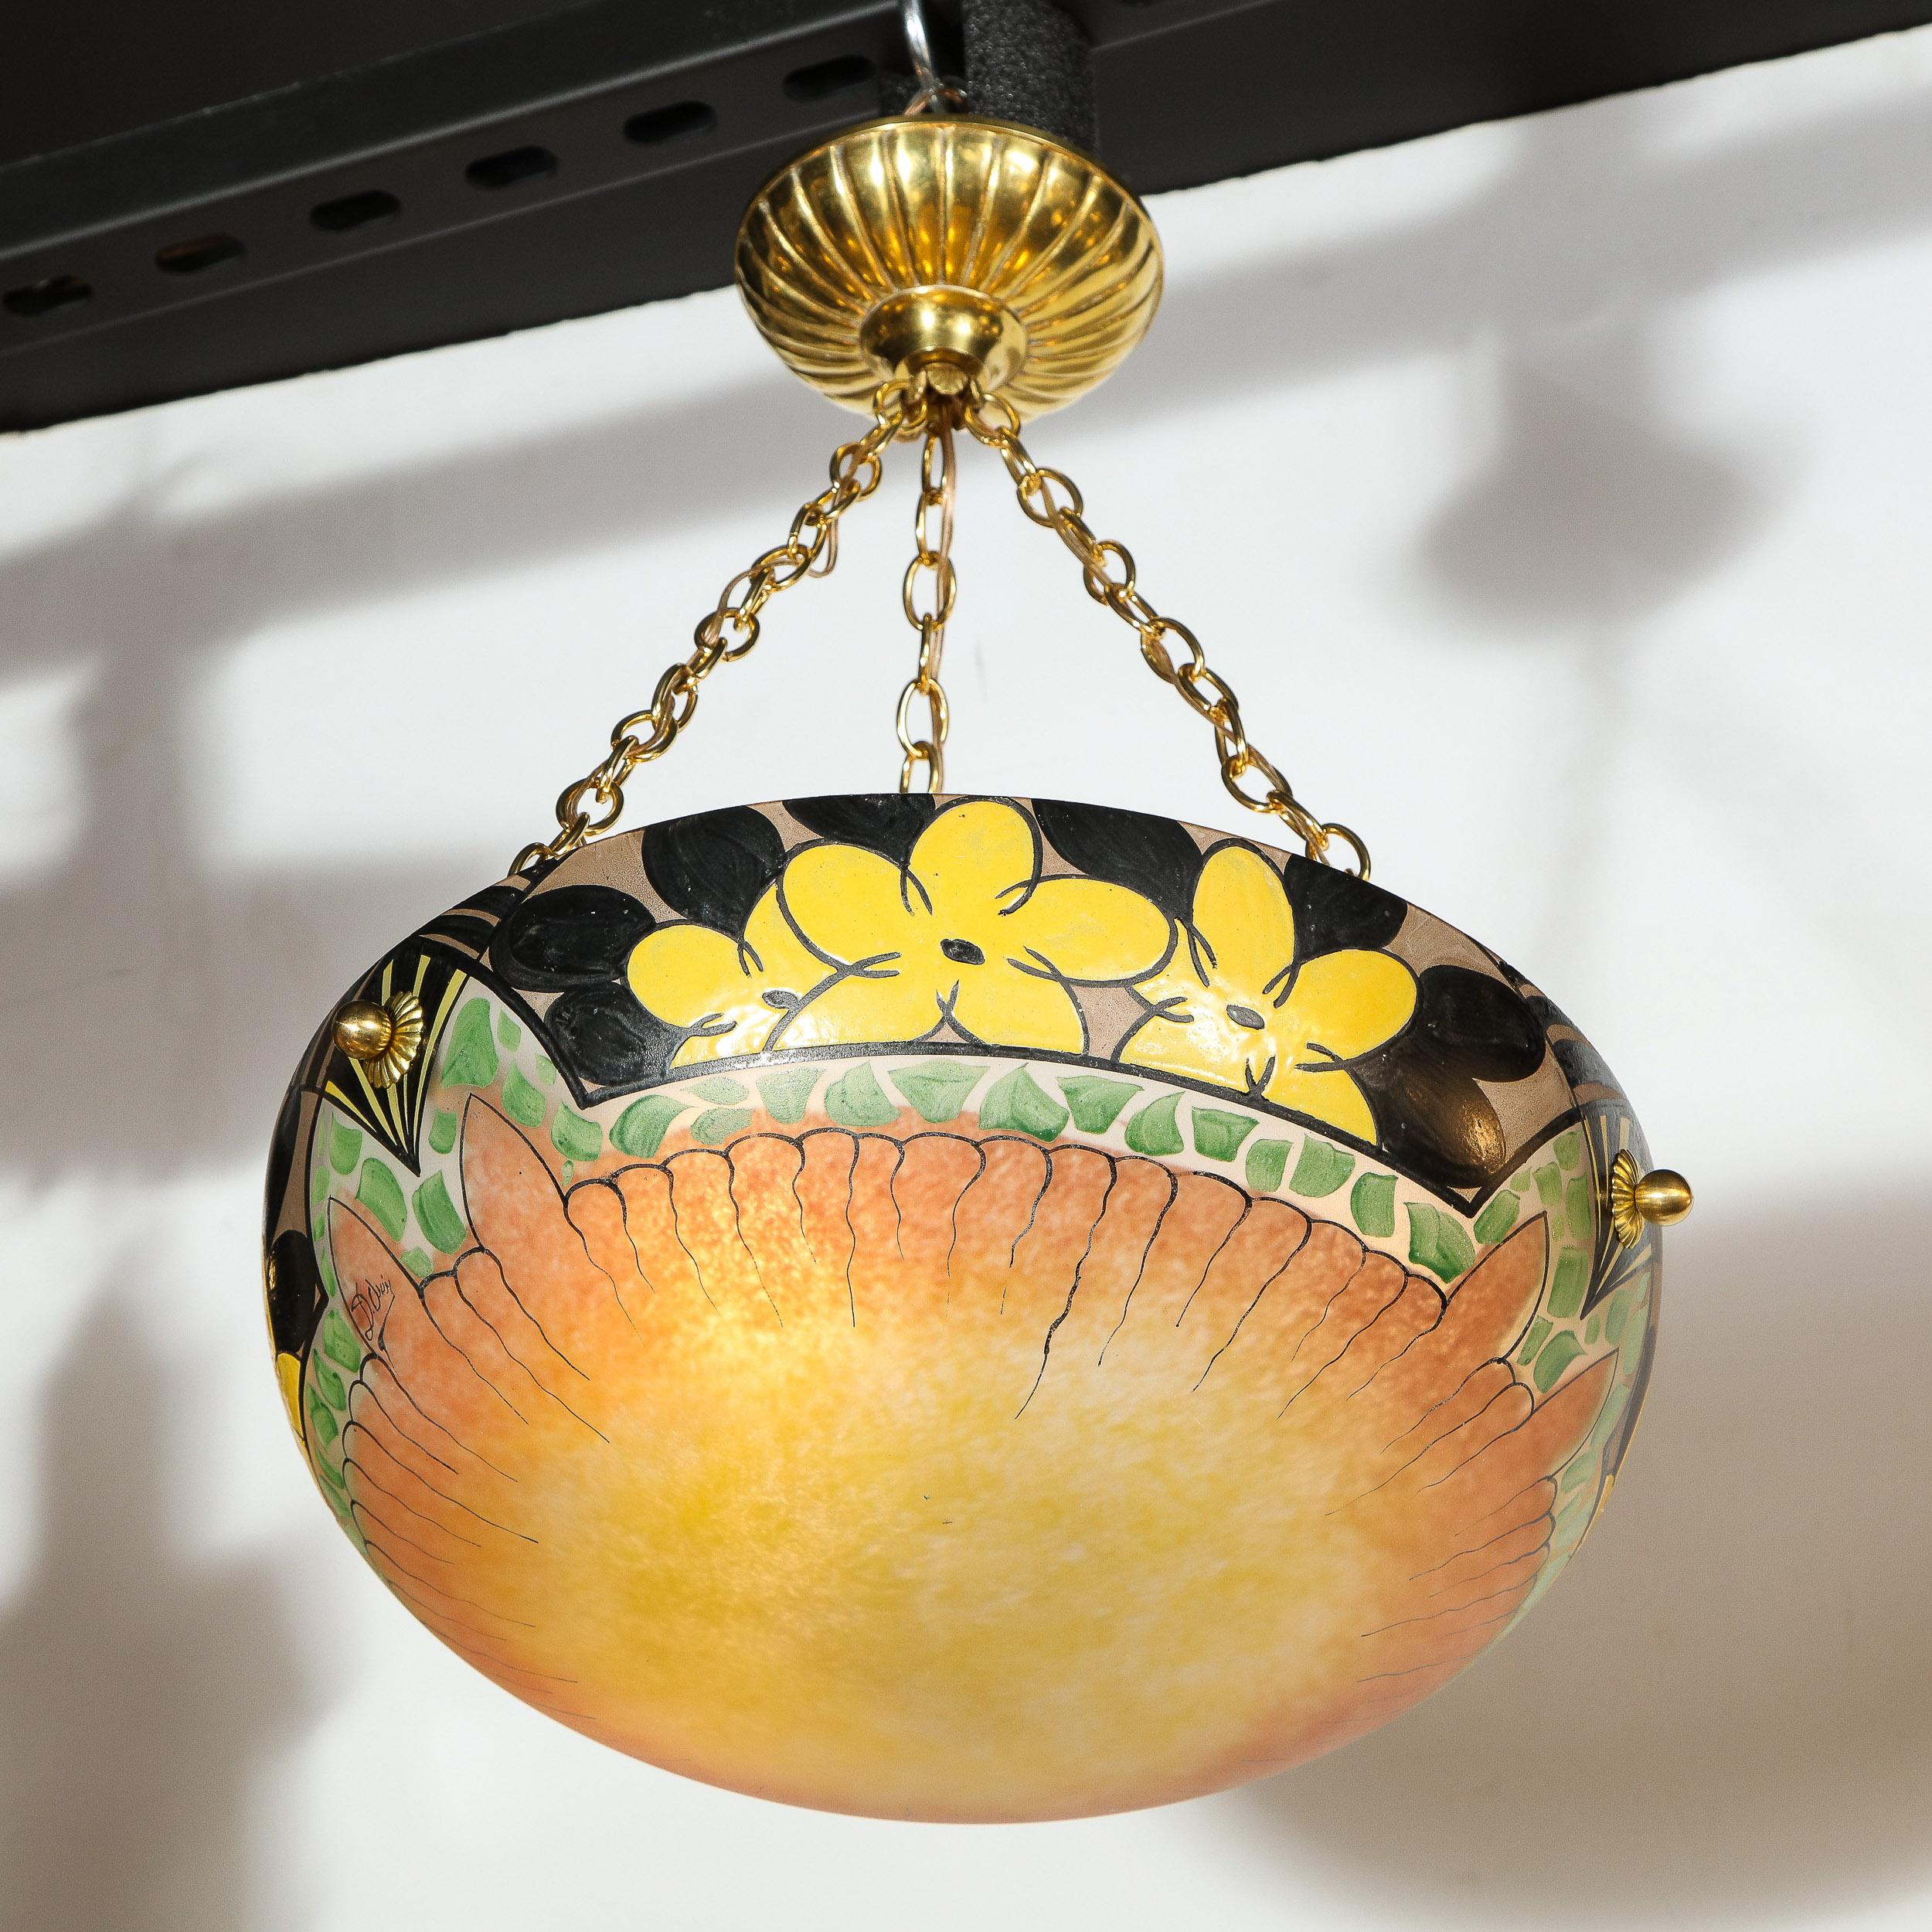 This striking Art Deco chandelier was realized by the acclaimed Pierre D'Avesne in France, circa 1930. It features a convex domed glass shade with a blush rose bottom hand painted with sinuous lines, abstract forms, and graphic stylized floral